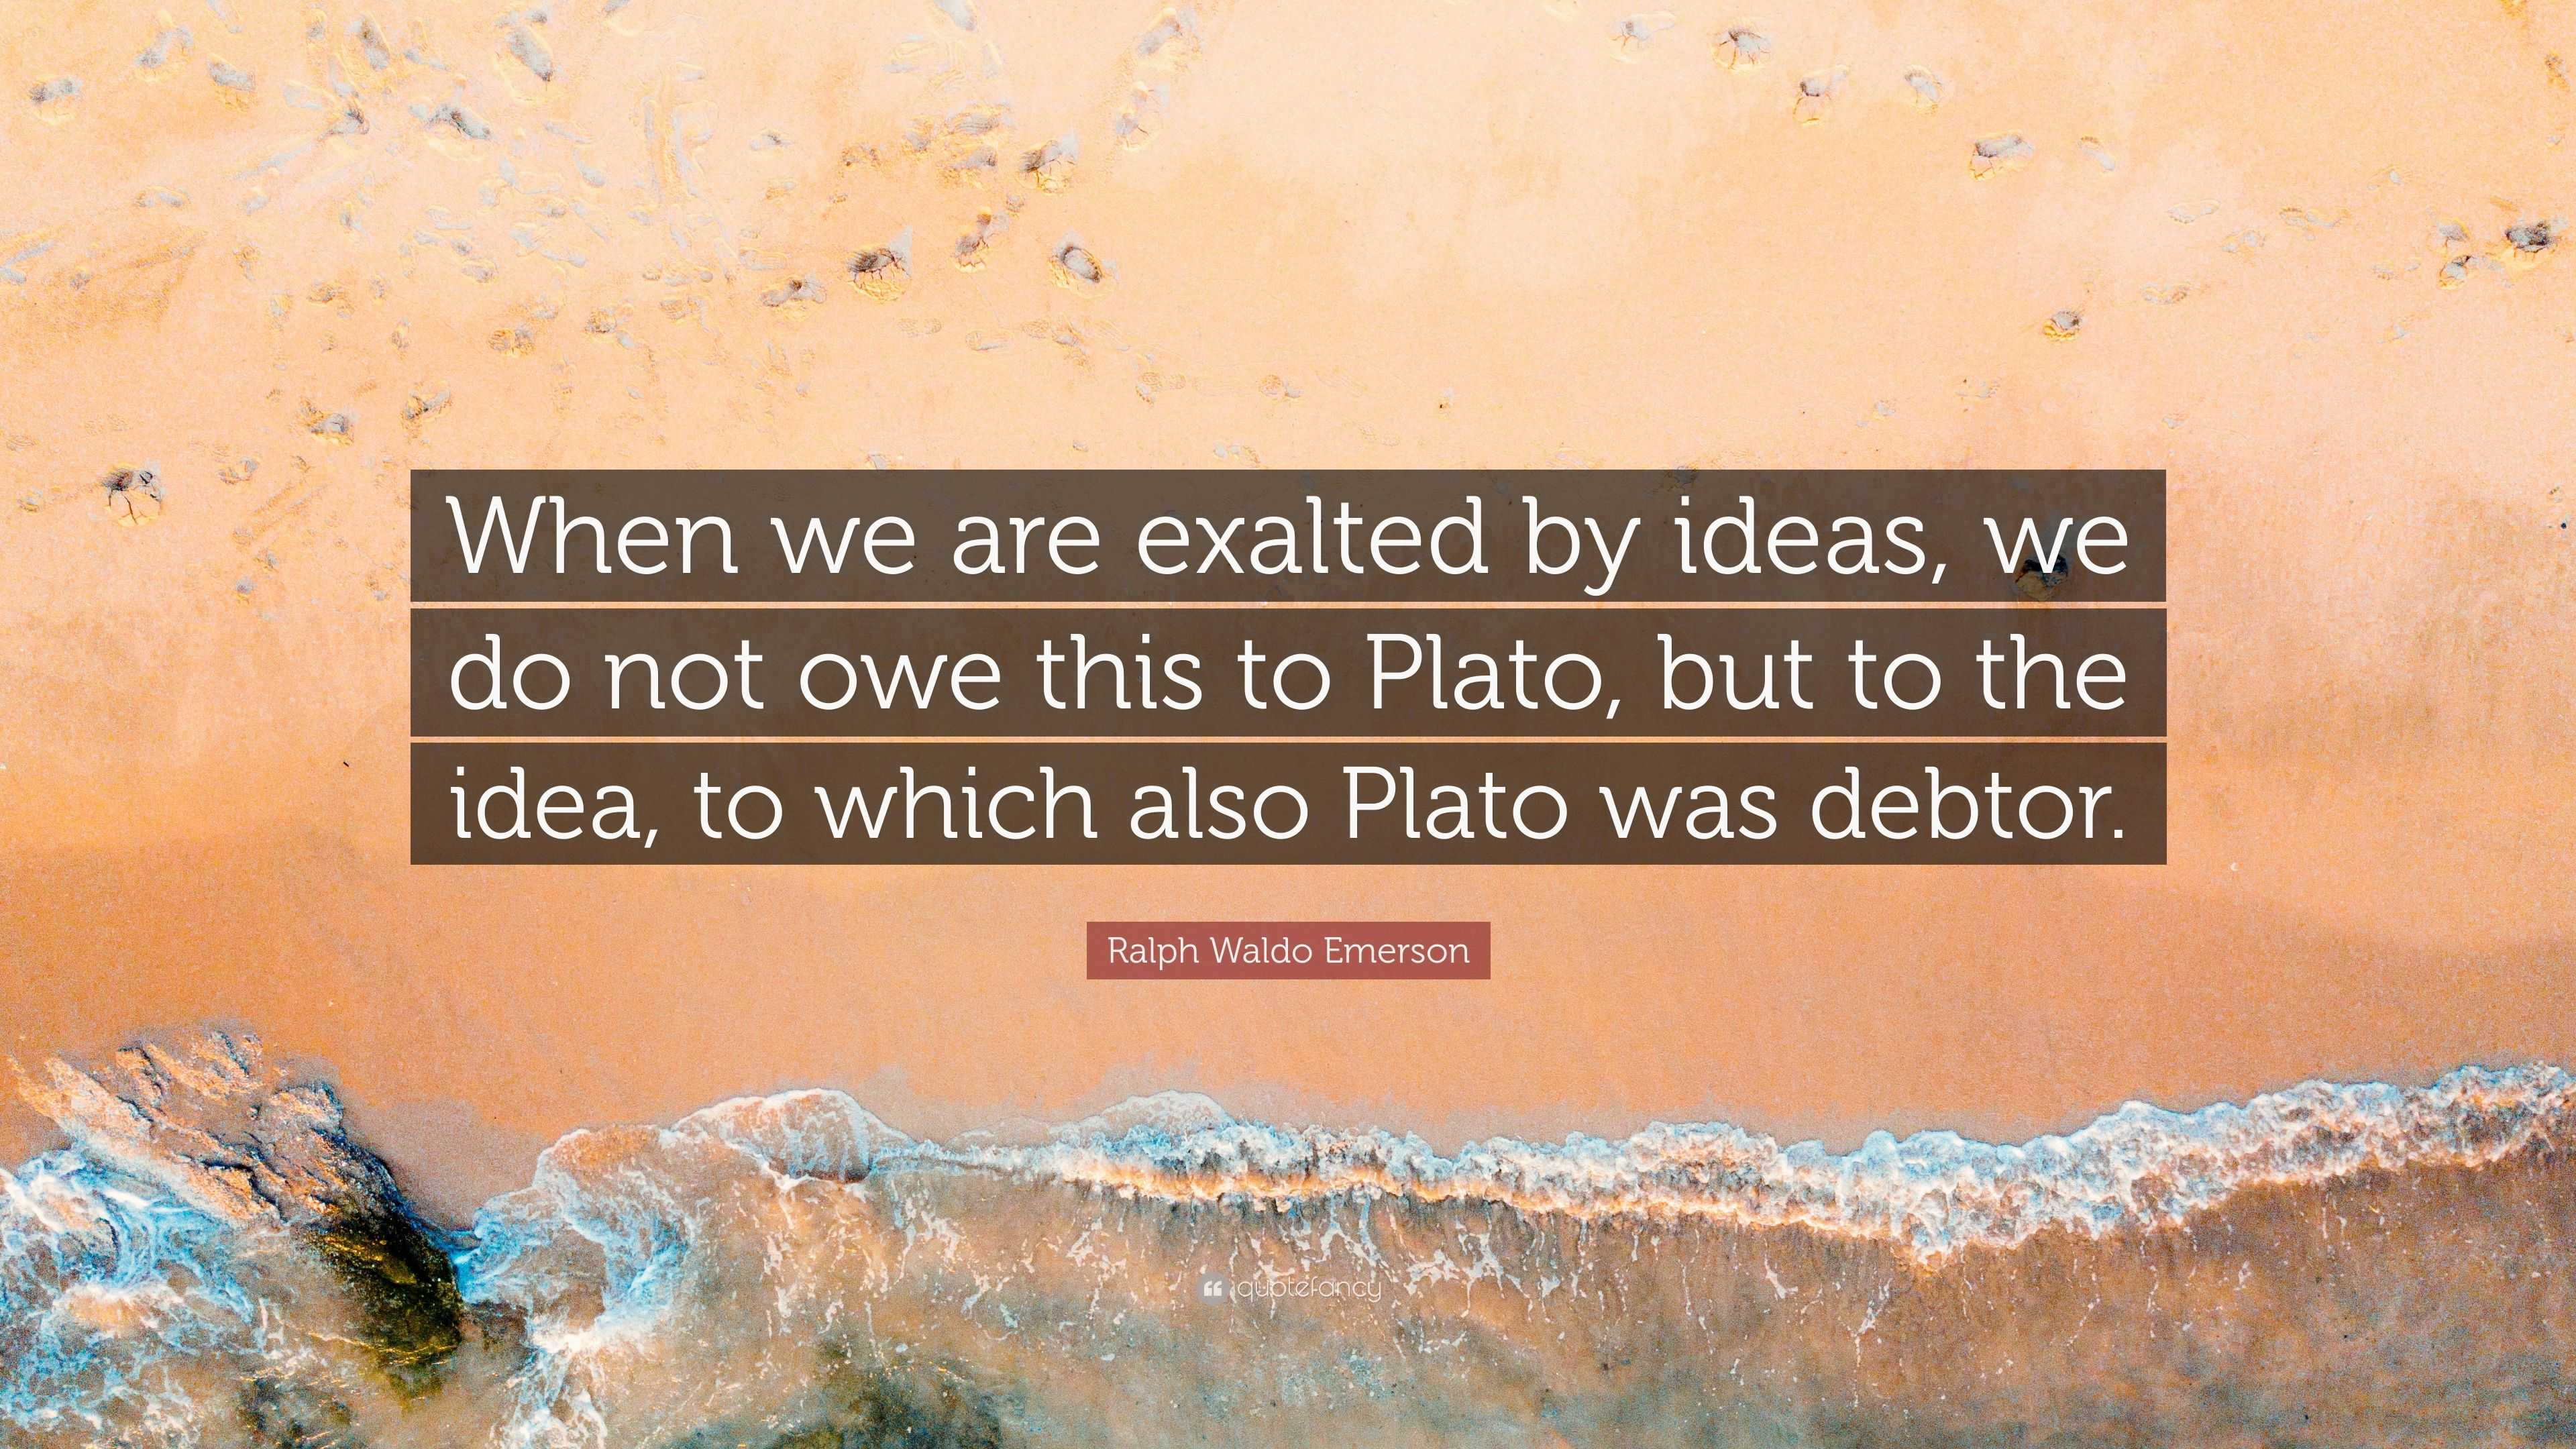 Ralph Waldo Emerson Quote: “When we are exalted by ideas, we do not owe ...